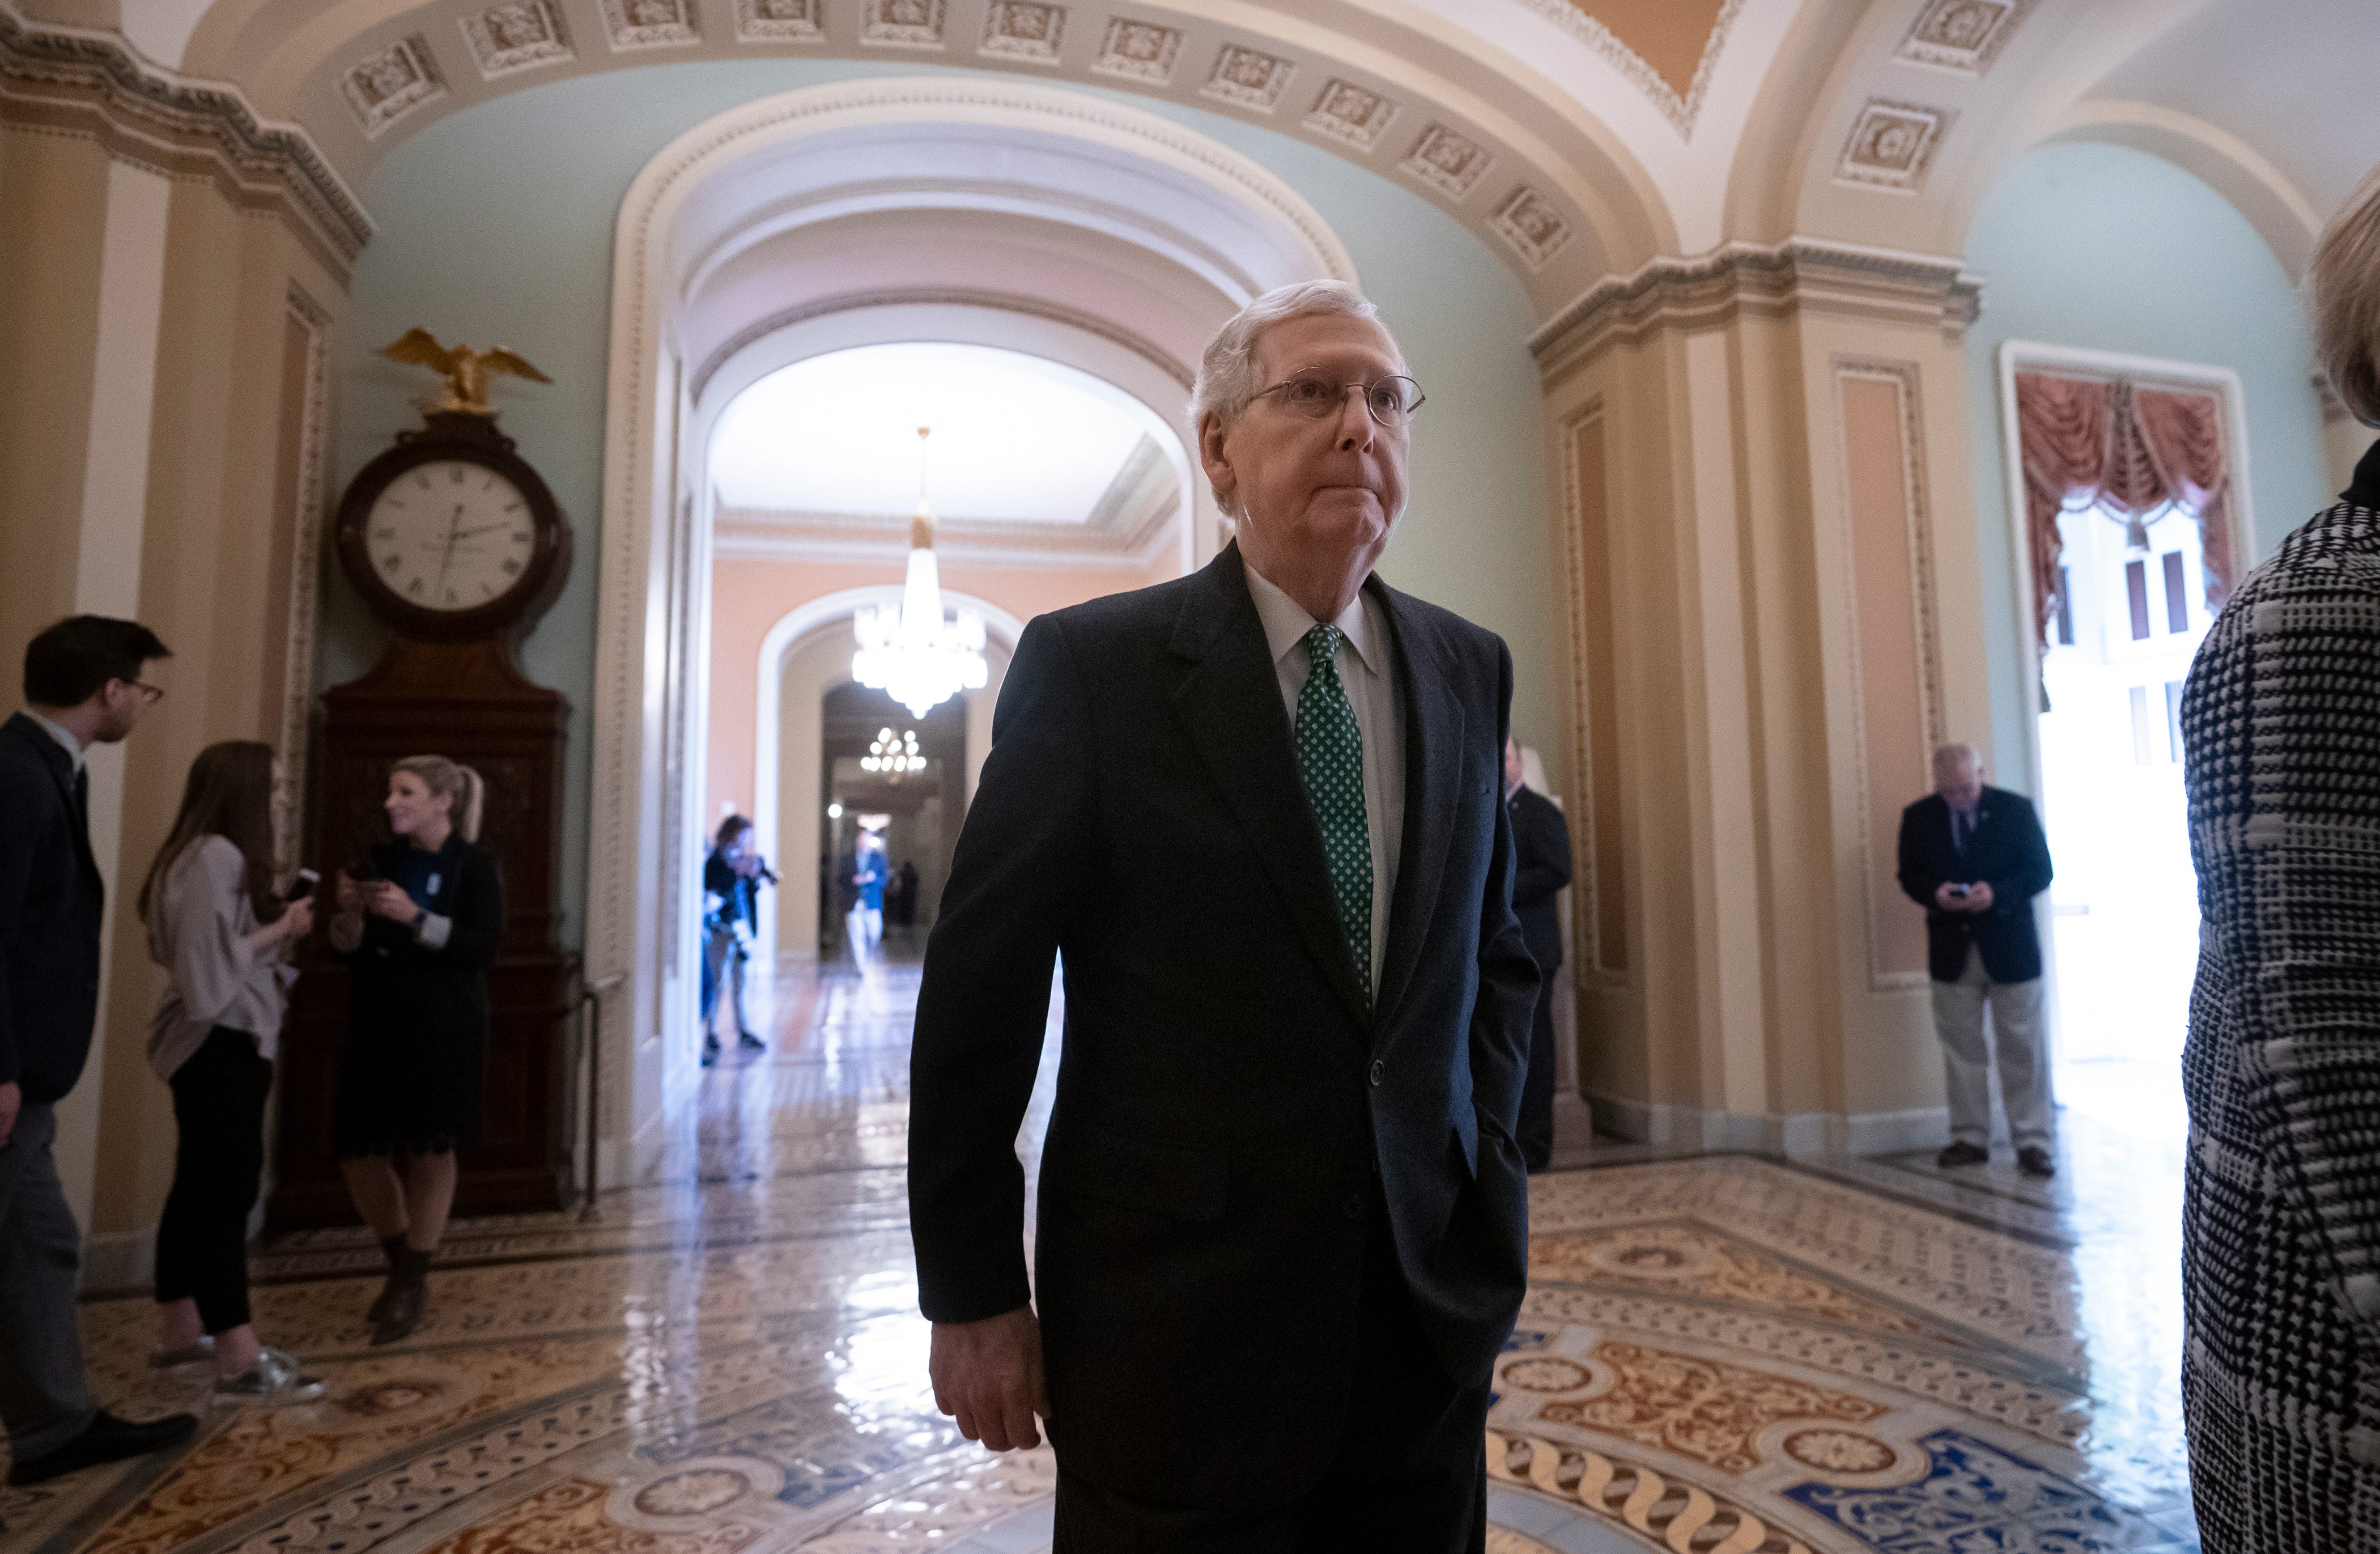 Senate Majority Leader Mitch McConnell, R-Ky., walks to the chamber as the Republican-run Senate rejected President Donald Trump's declaration of a national emergency at the southwest border, at the Capitol in Washington, Thursday, March 14, 2019.